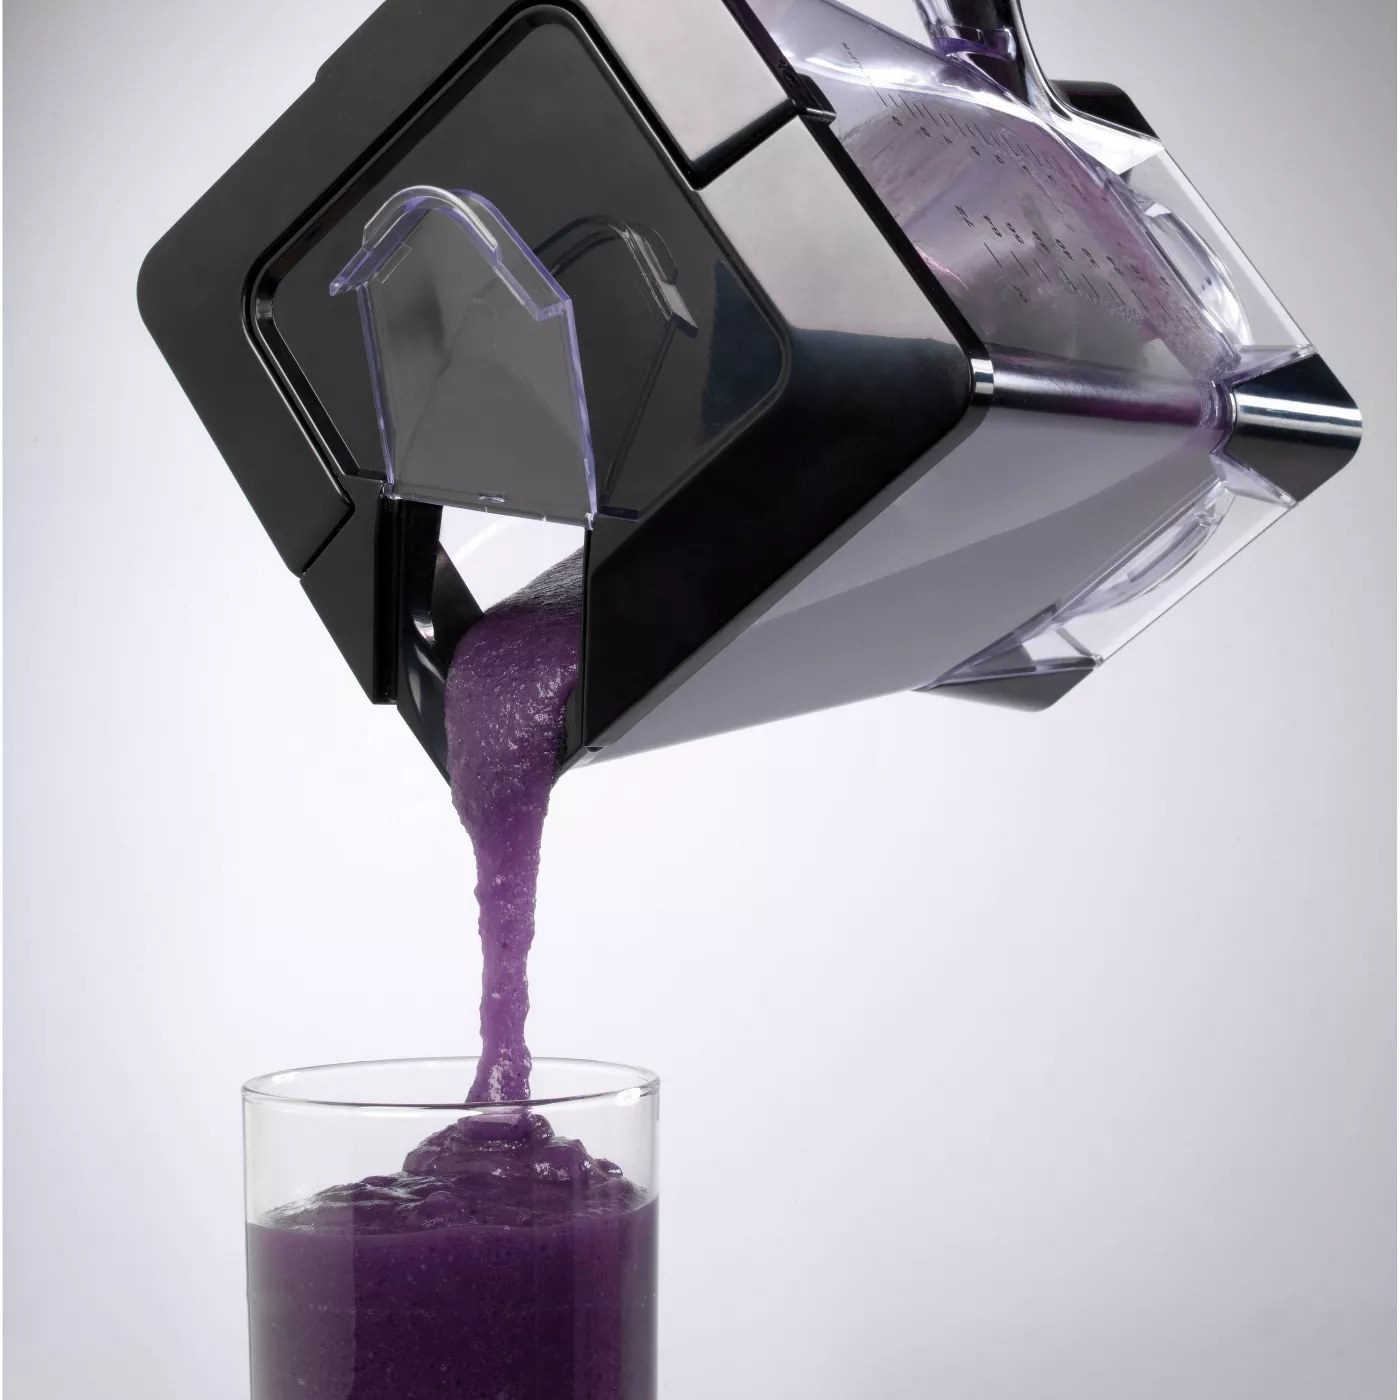 A model pouring a smoothie from the blender into a glass